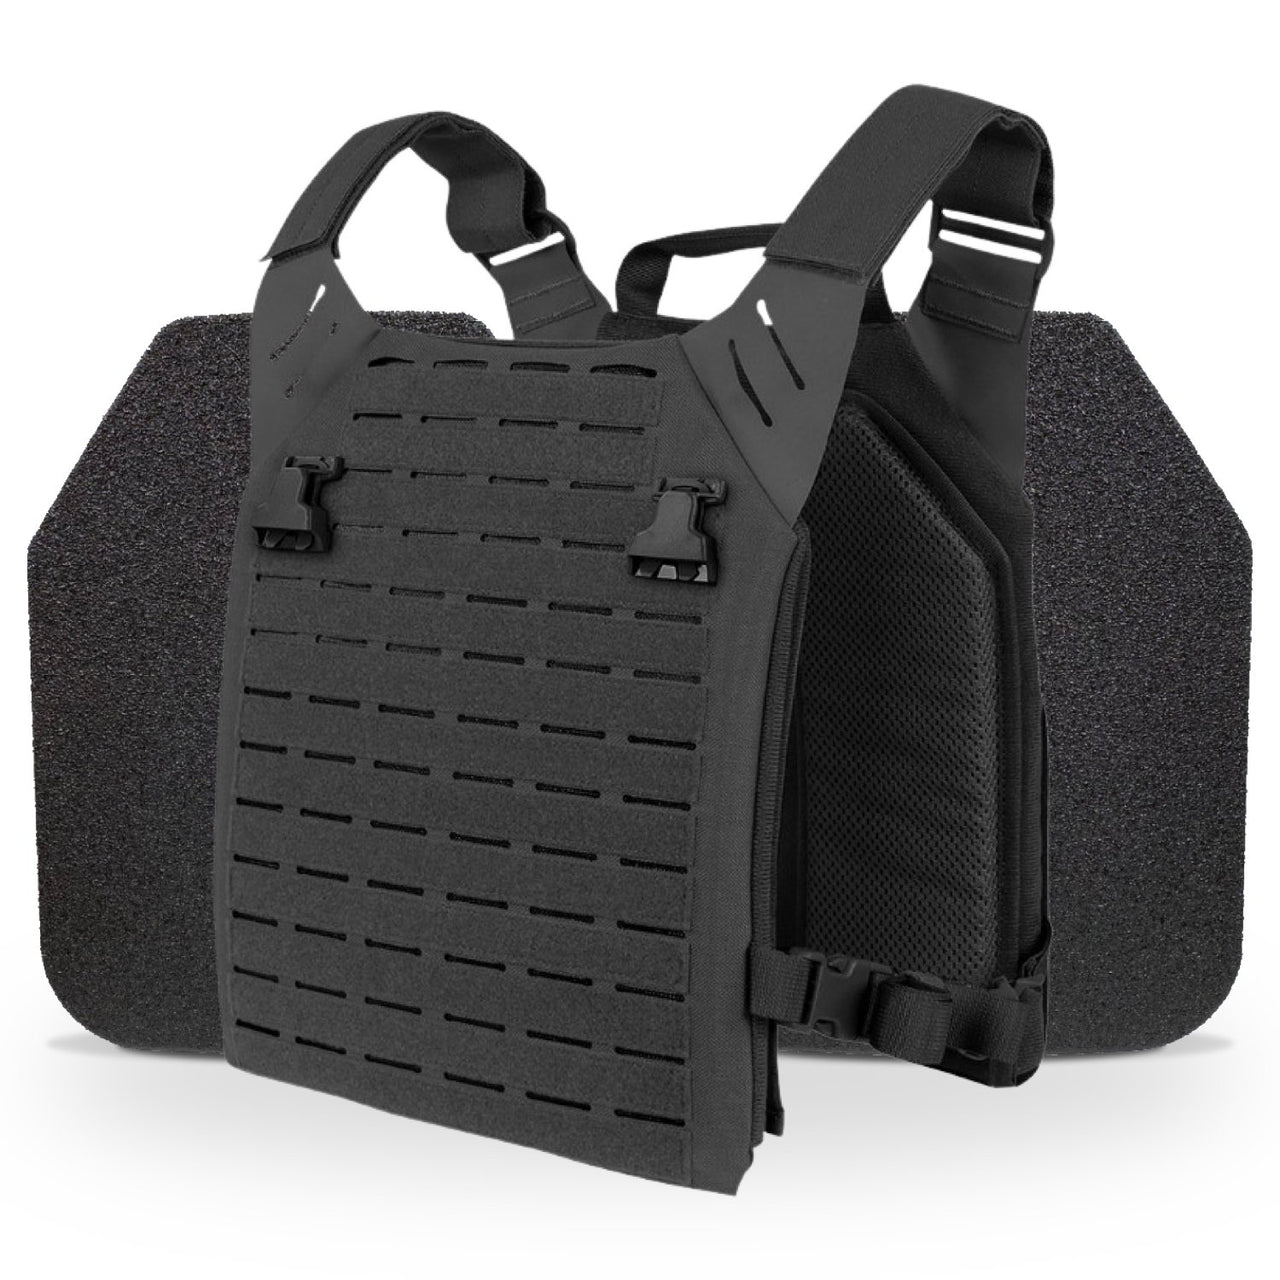 A Body Armor Direct MVP Plate Carrier on a white background.